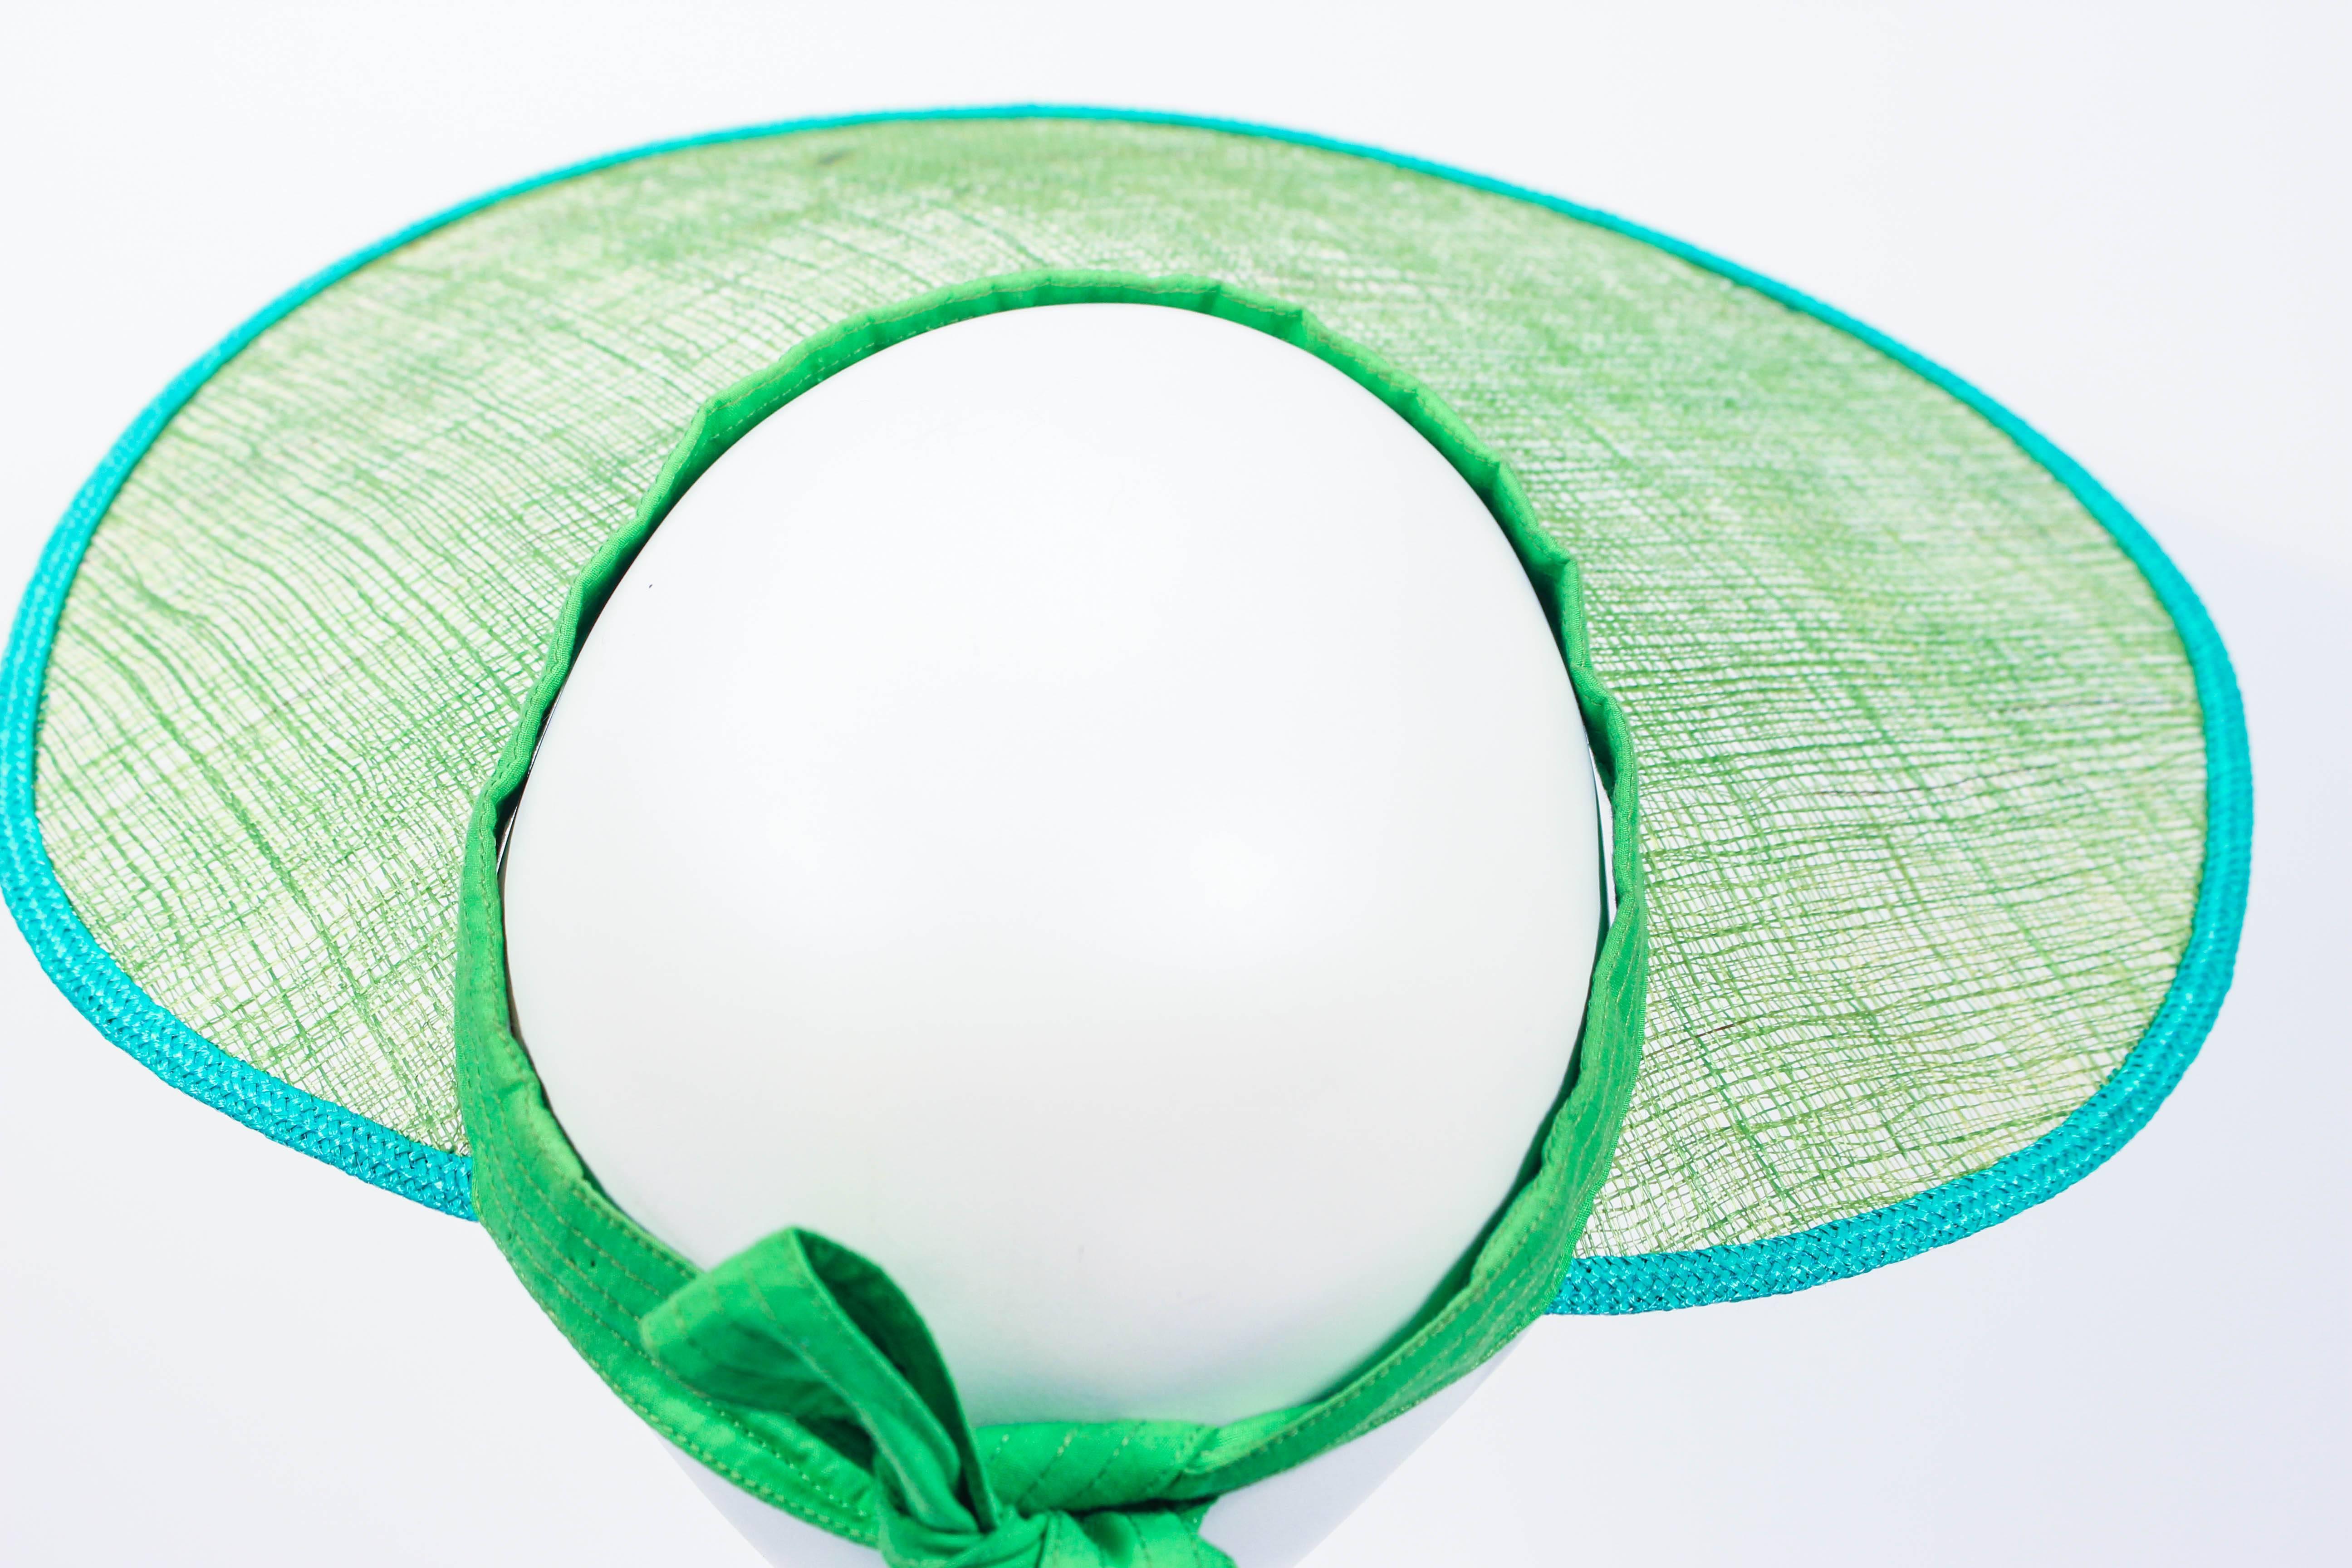 YVES SAINT LAURENT RIVE GAUCHE Runway Vintage Green Visor In Excellent Condition For Sale In Los Angeles, CA